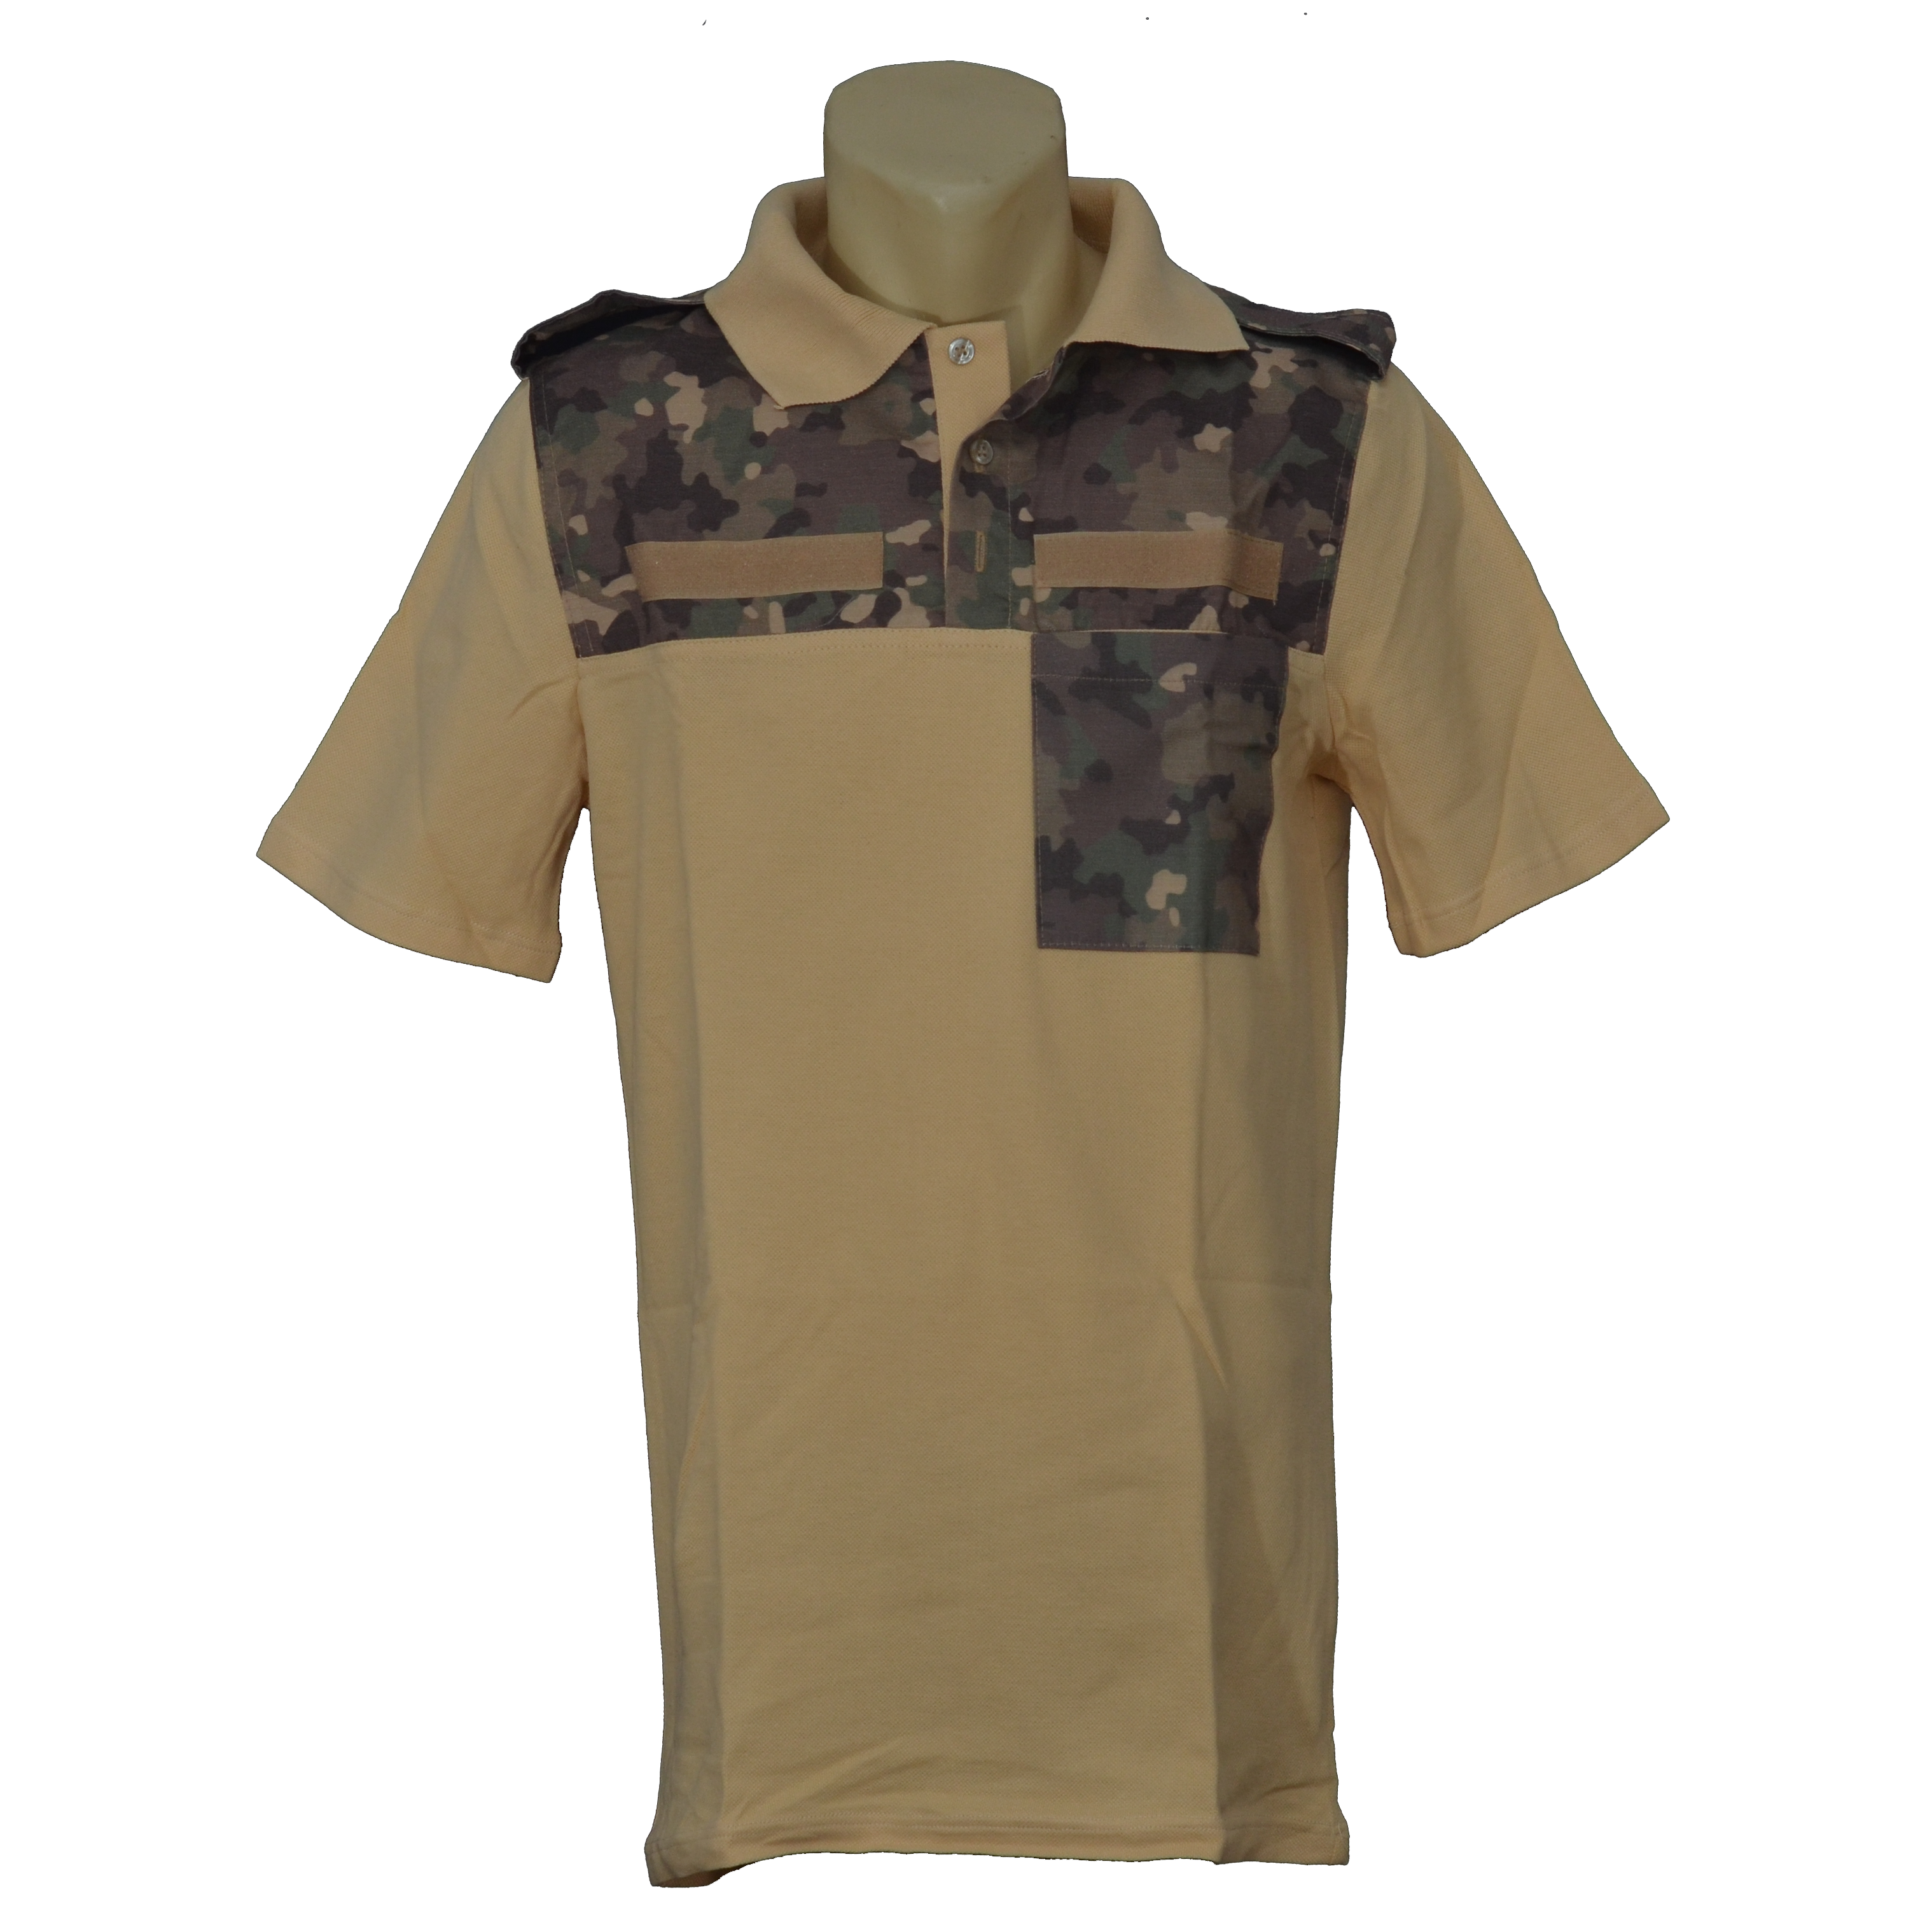 counter Substantially my Tricou Combat Fortele Terestre – RO Army Shop